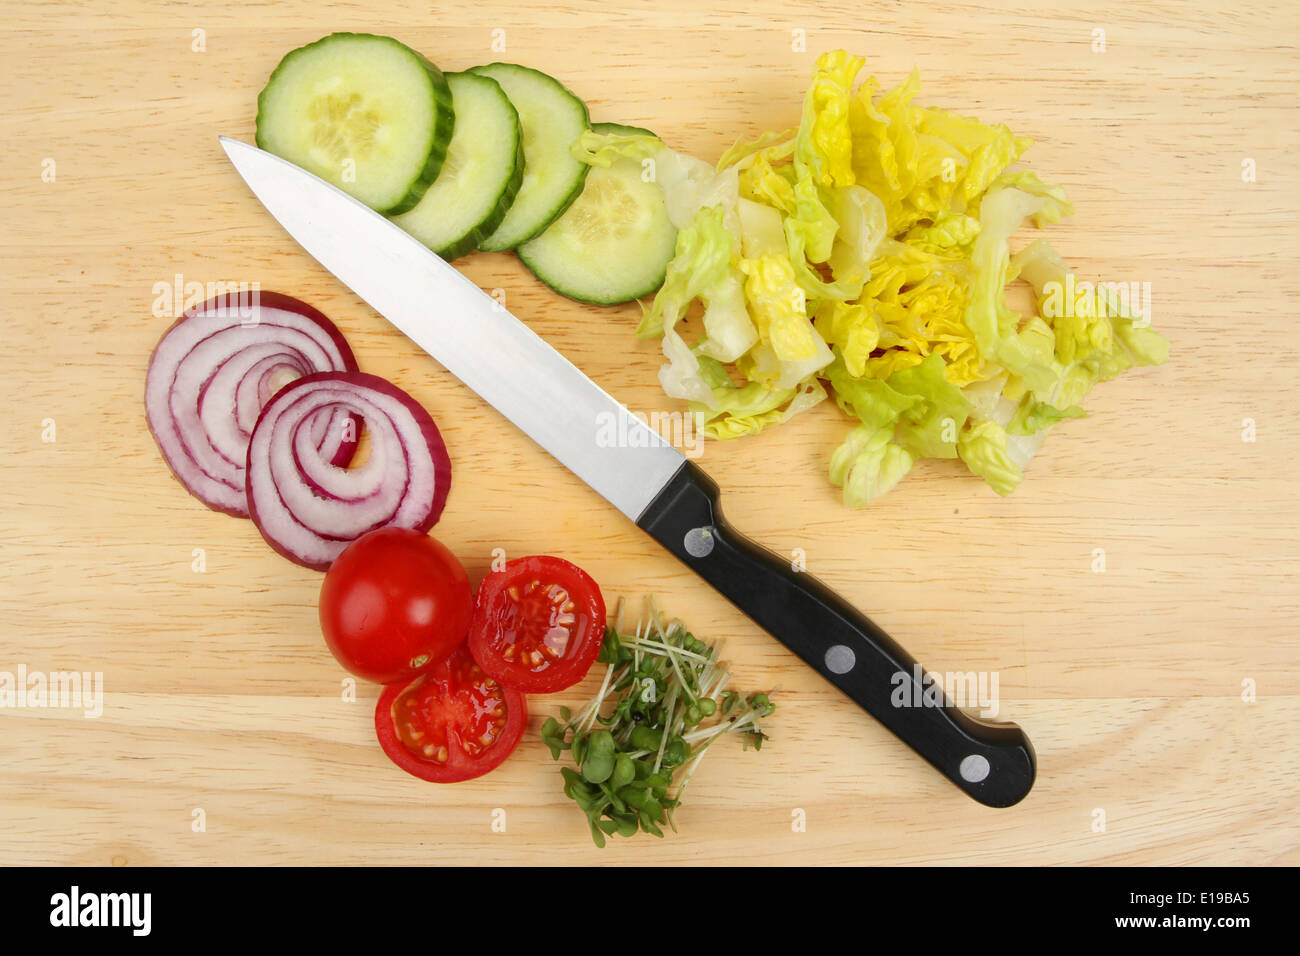 Chopped salad ingredients with a knife on a wooden food preparation board Stock Photo